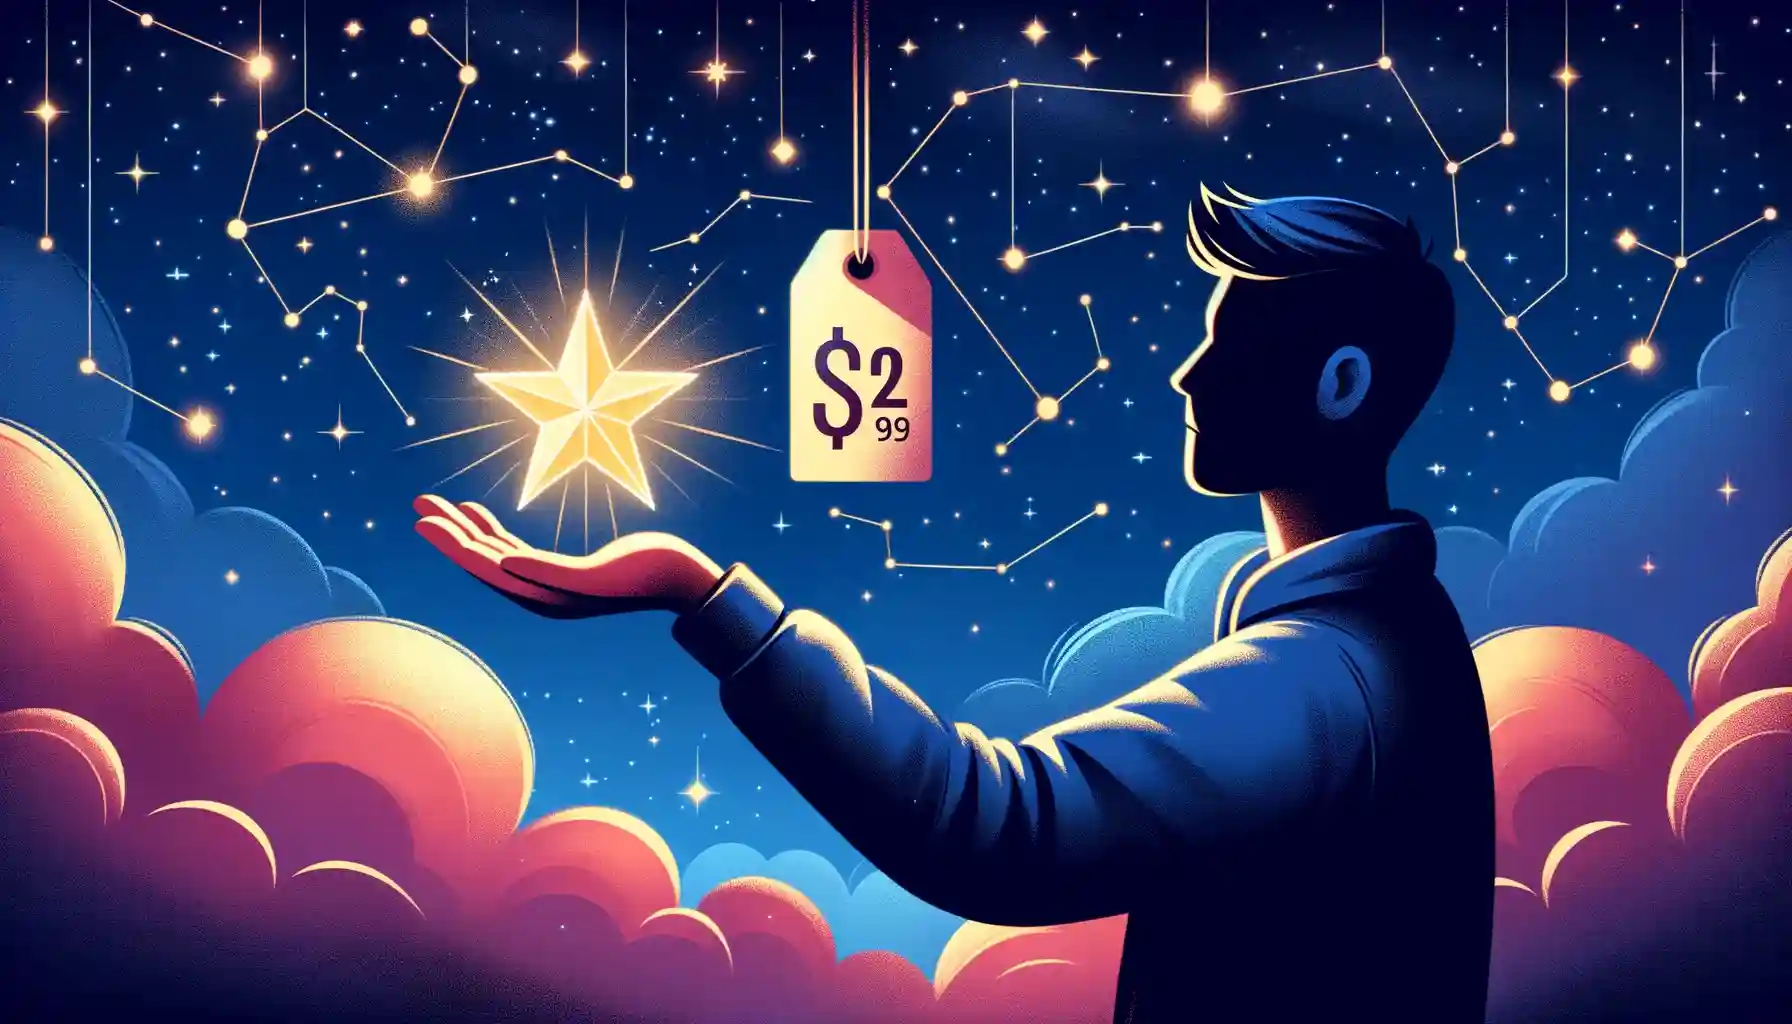 Illustration of a person holding a glowing star in their hand with a price tag attached to it